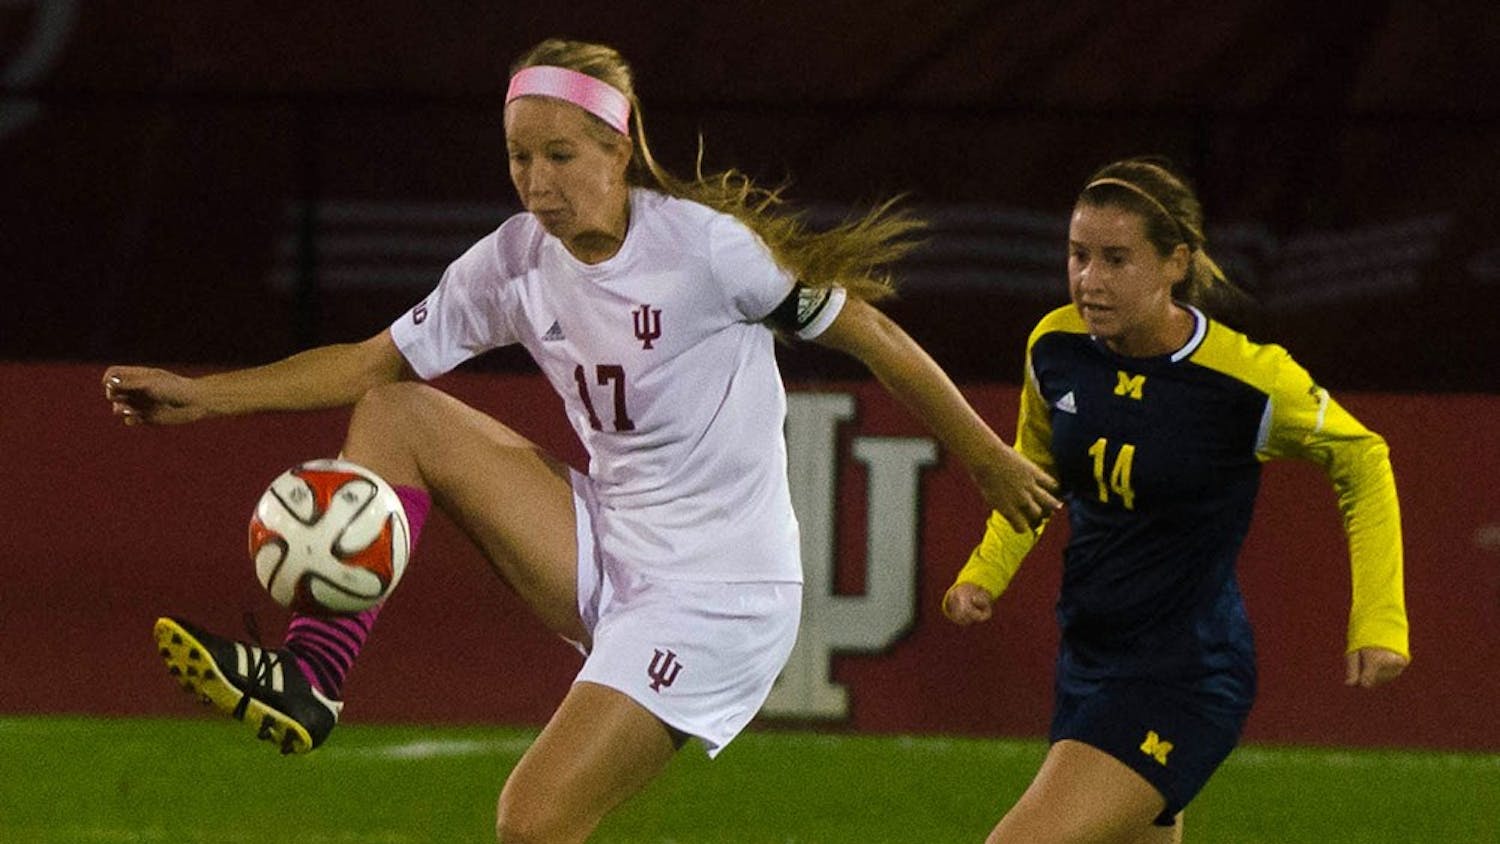 Senior midfielder Jordan Woolums intercepts a pass during IU's game against Michigan on Oct. 11 at Bill Armstrong Stadium. The wolverines defeated IU 3-0.